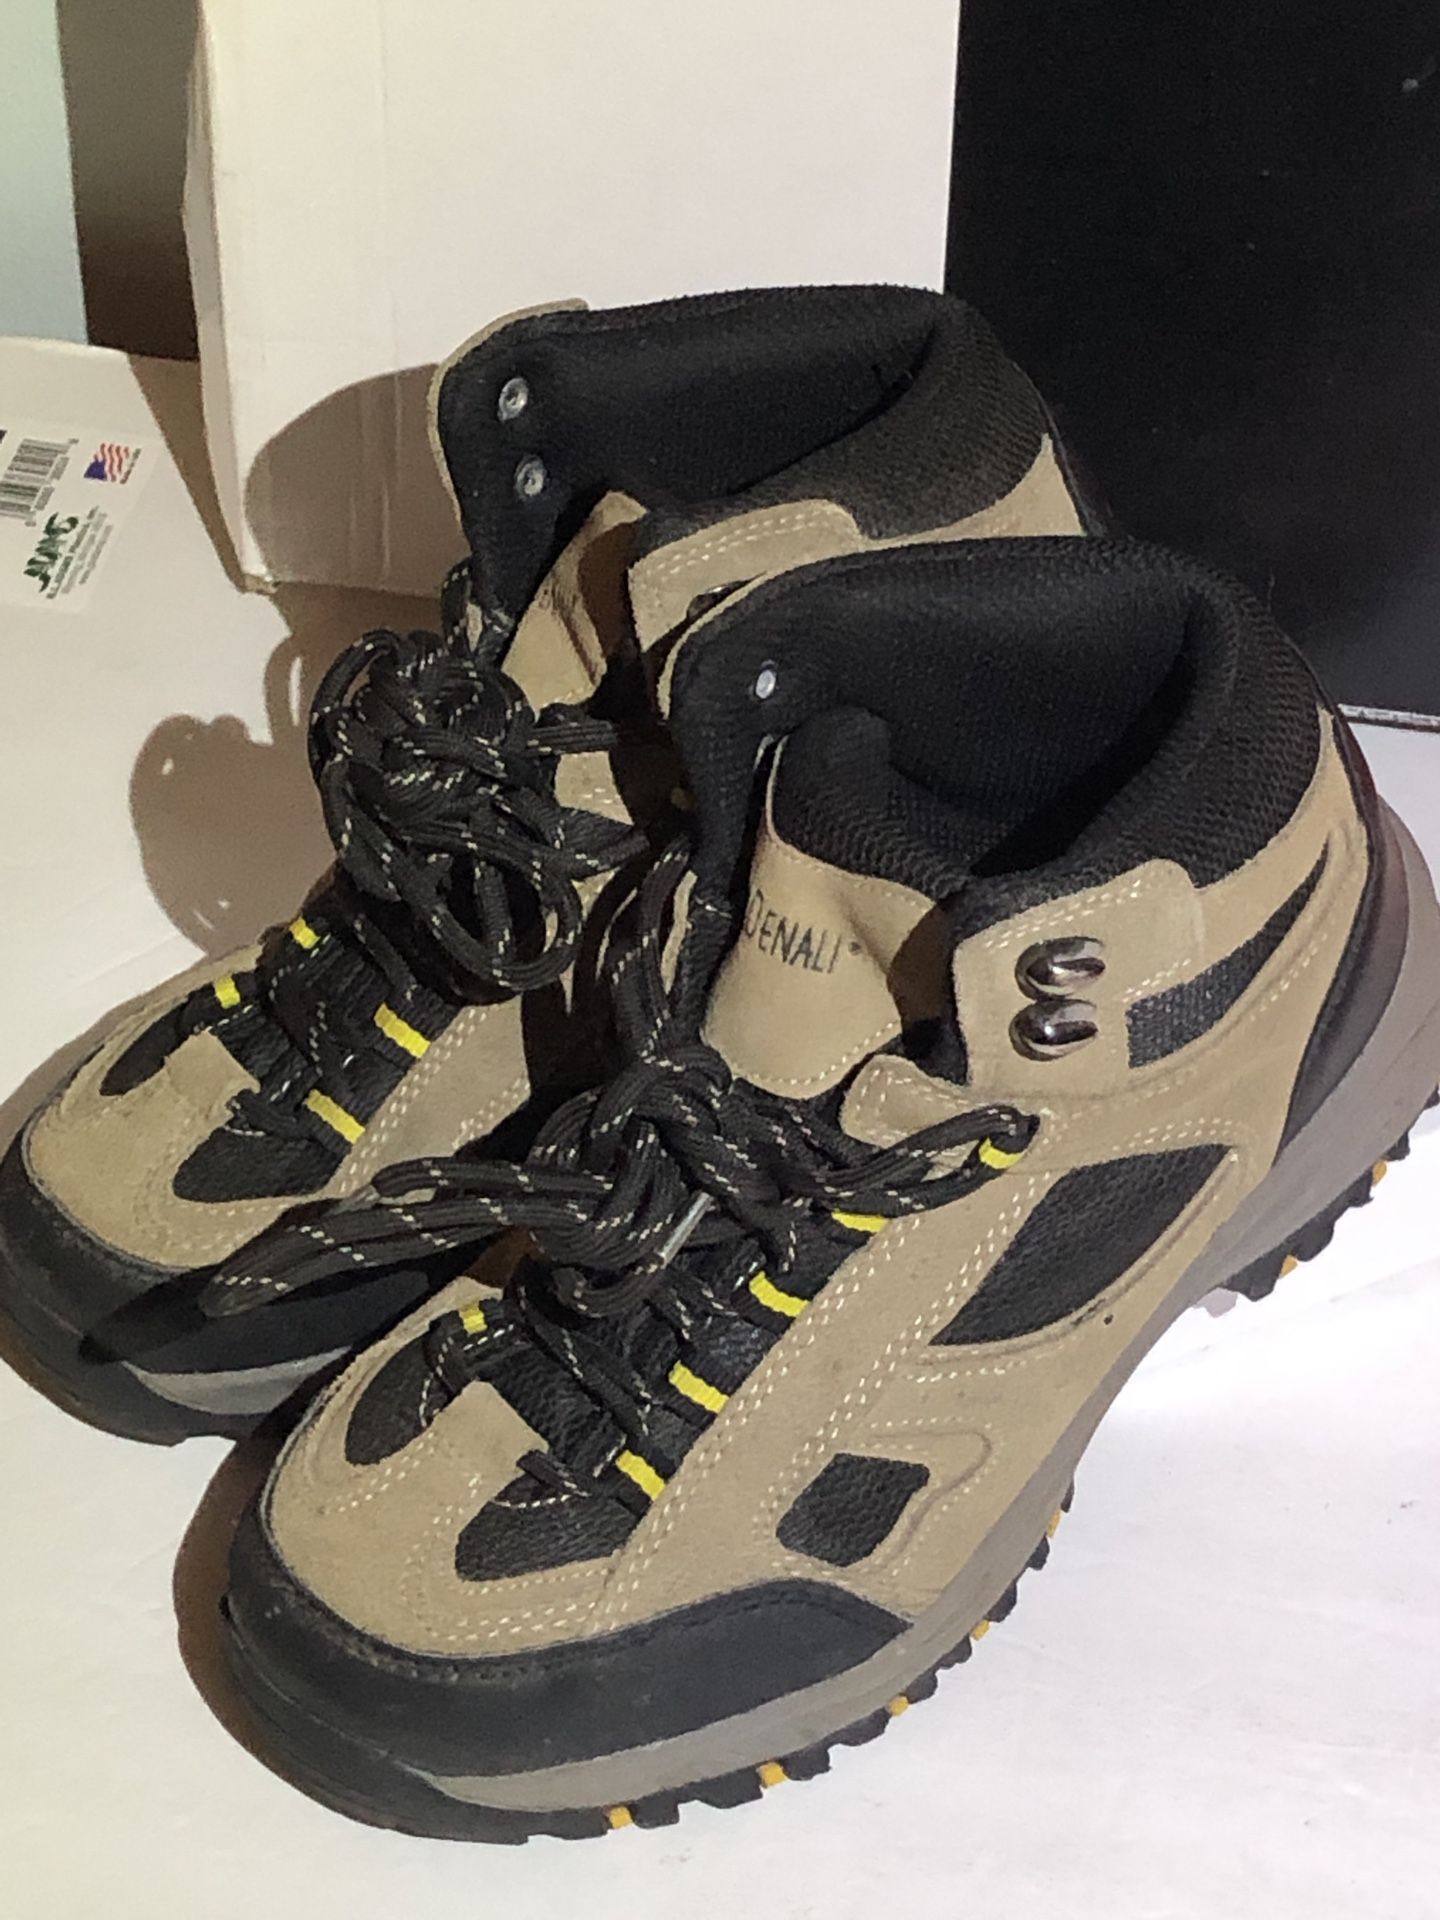 Denali  Youth Leather Hiking Boots.  Size 4y / 23 Cm